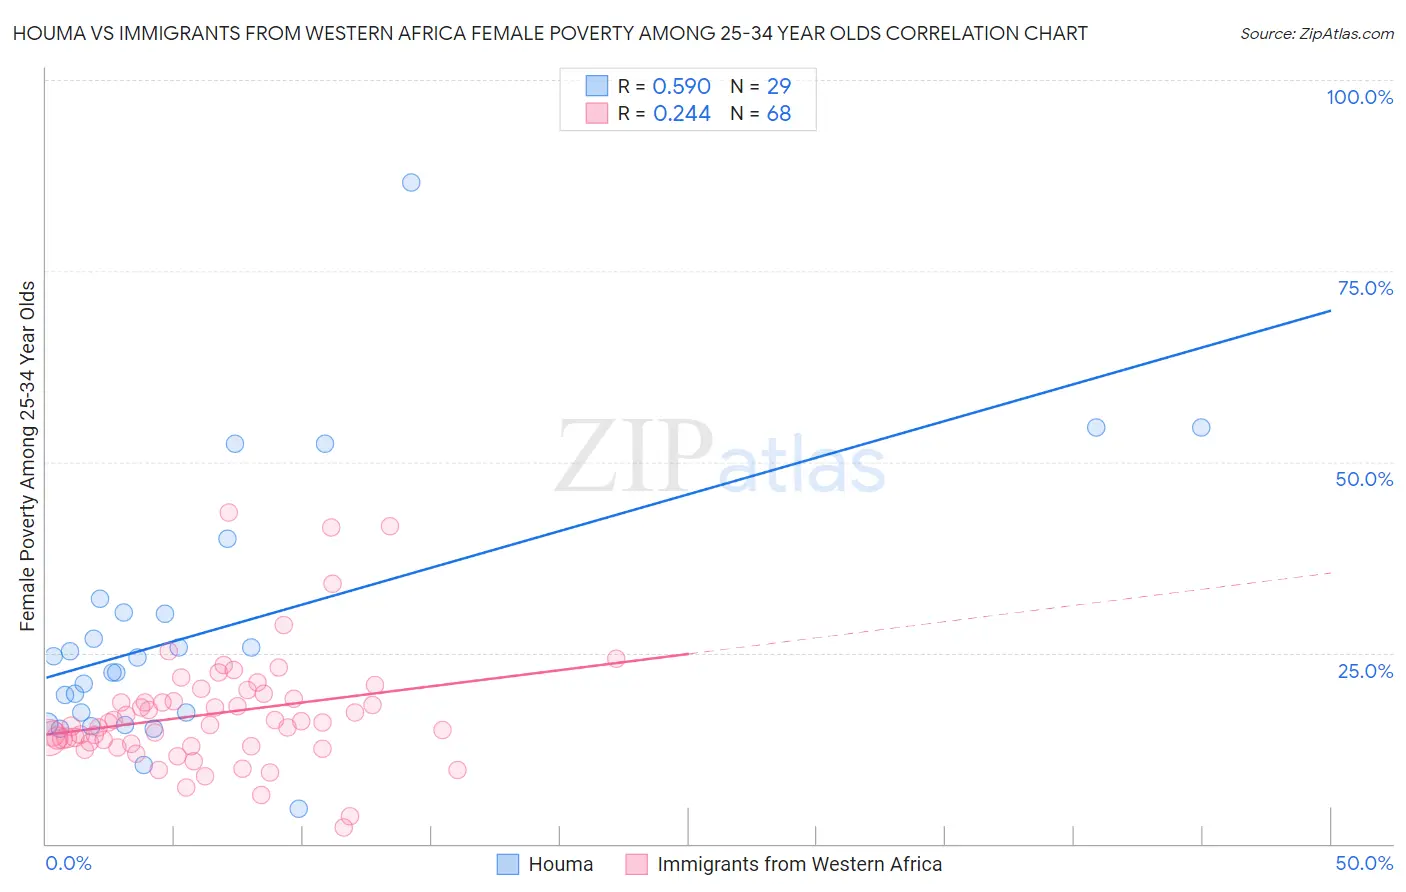 Houma vs Immigrants from Western Africa Female Poverty Among 25-34 Year Olds